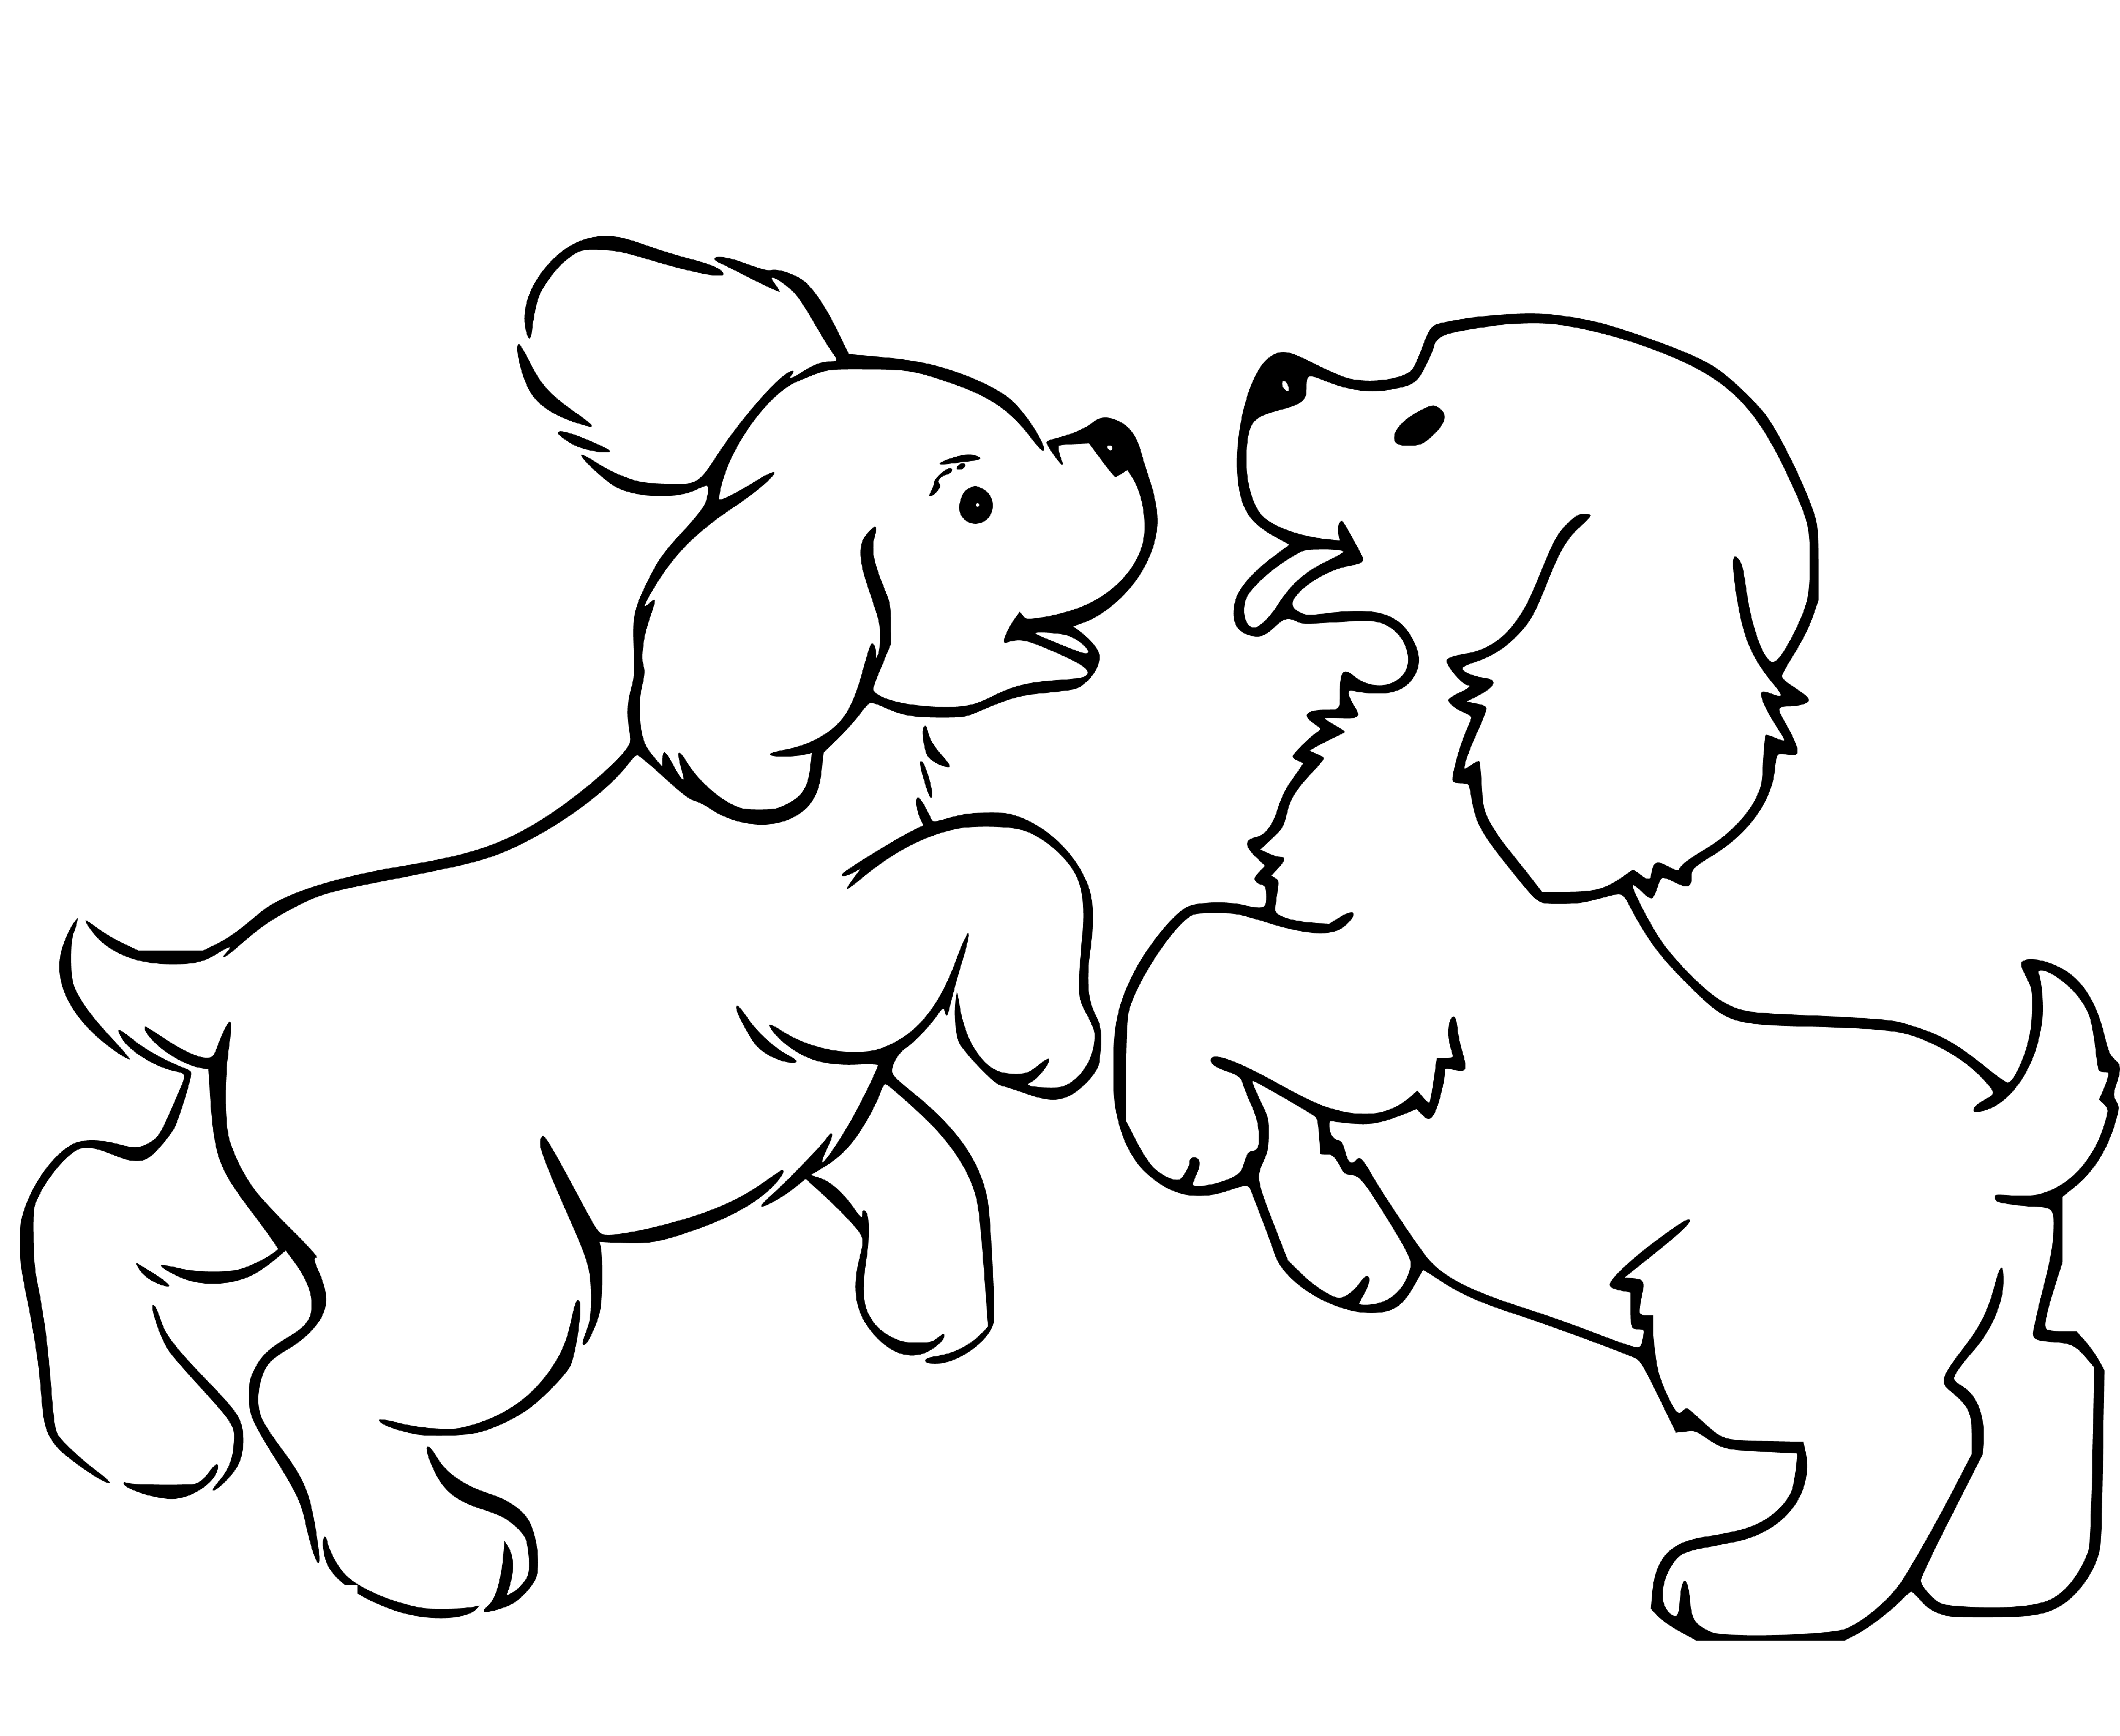 Puppies Coloring Page easy and simple for kids - SheetalColor.com